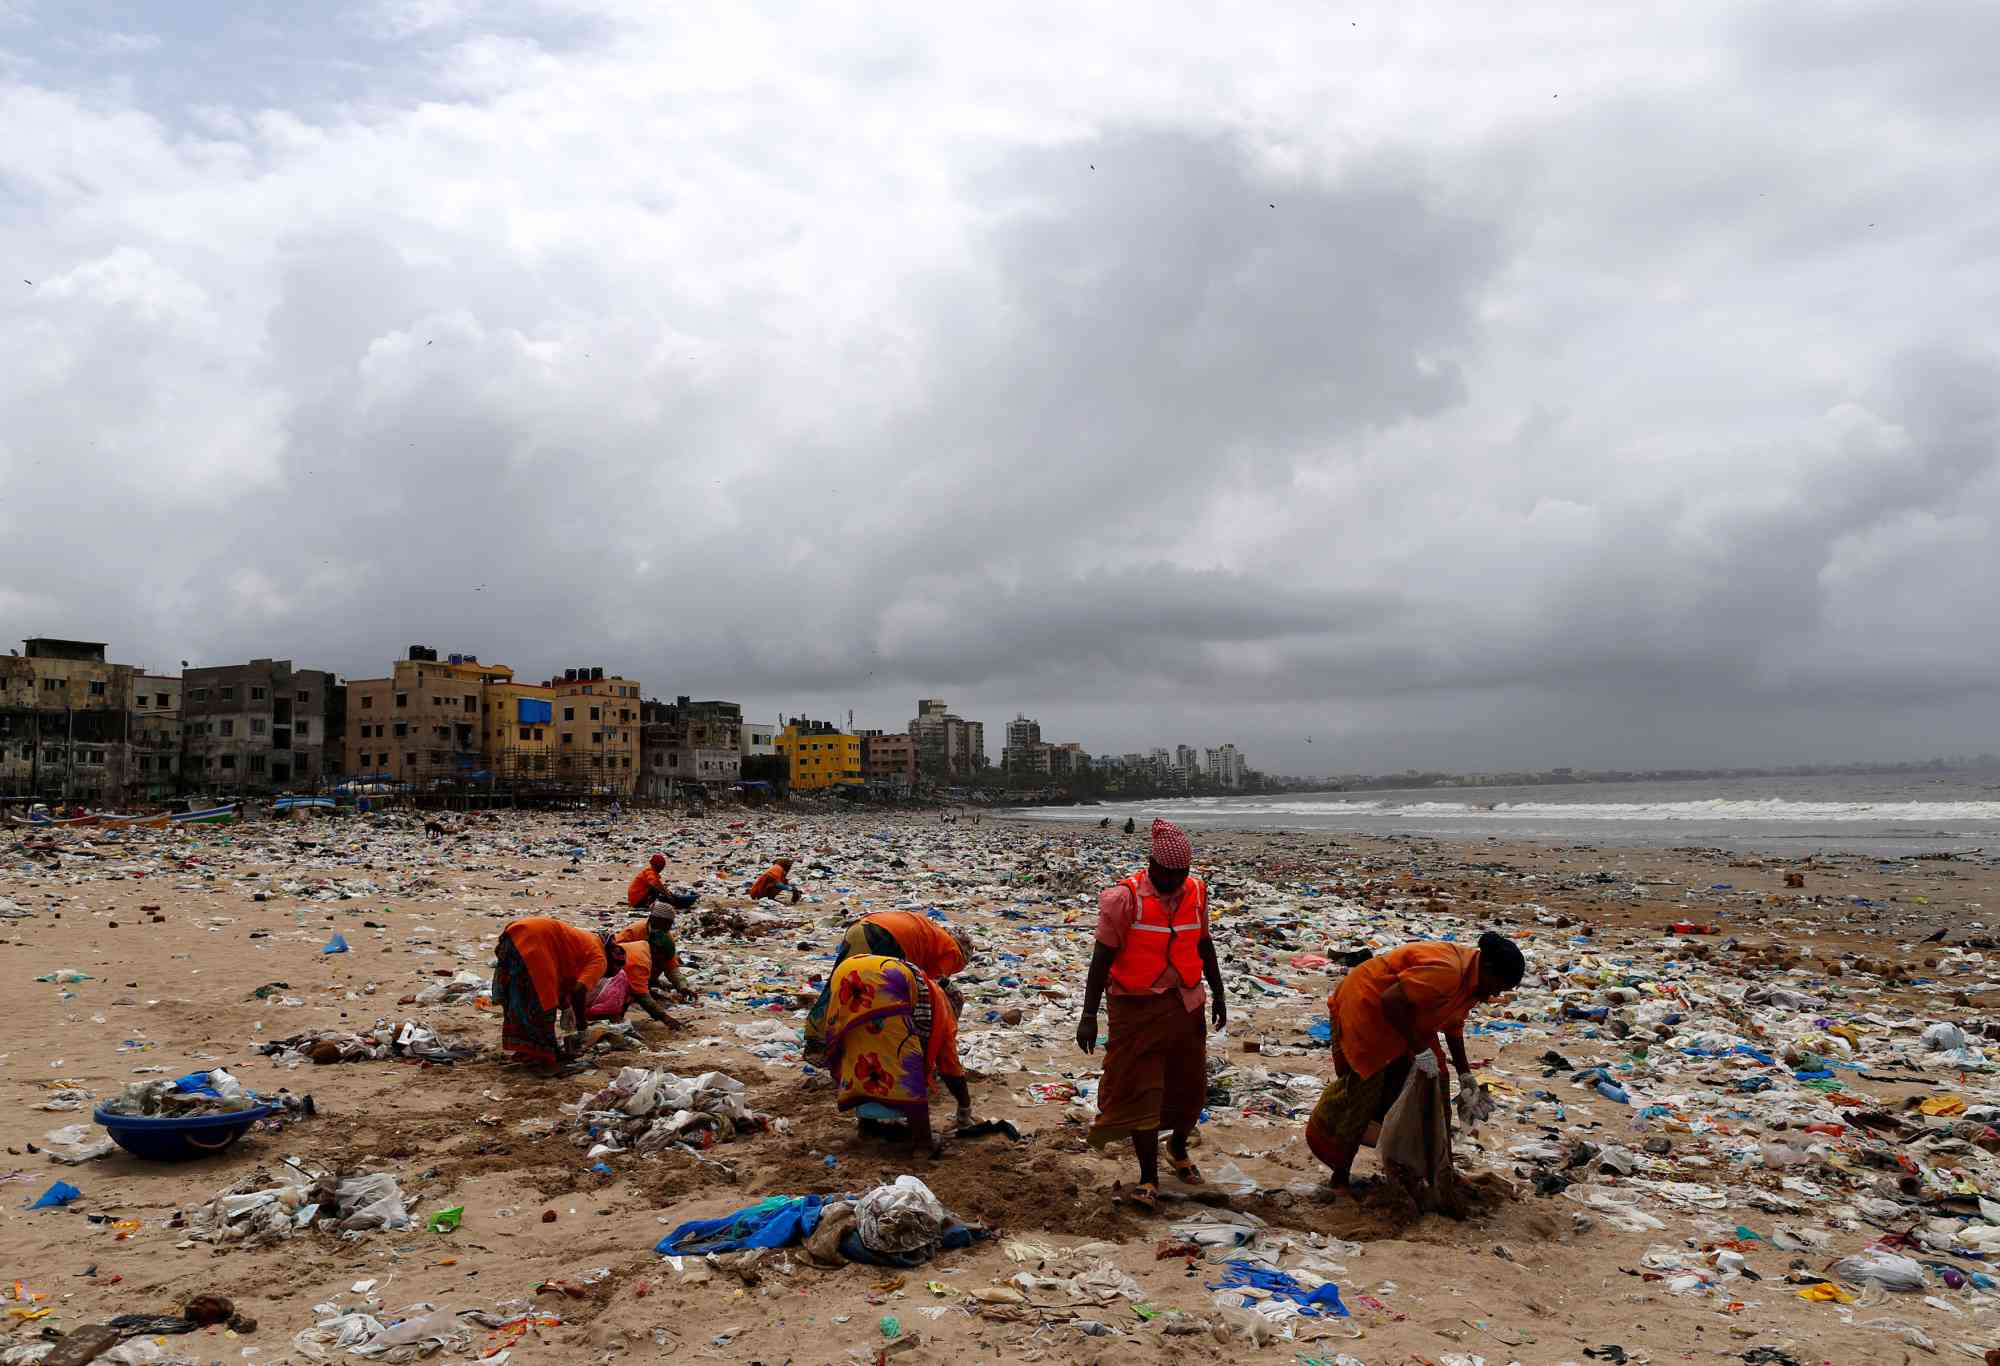 Municipal workers collect garbage as they clean a beach in Mumbai in August 2016. (Photo credit: Reuters/Danish Siddiqui).